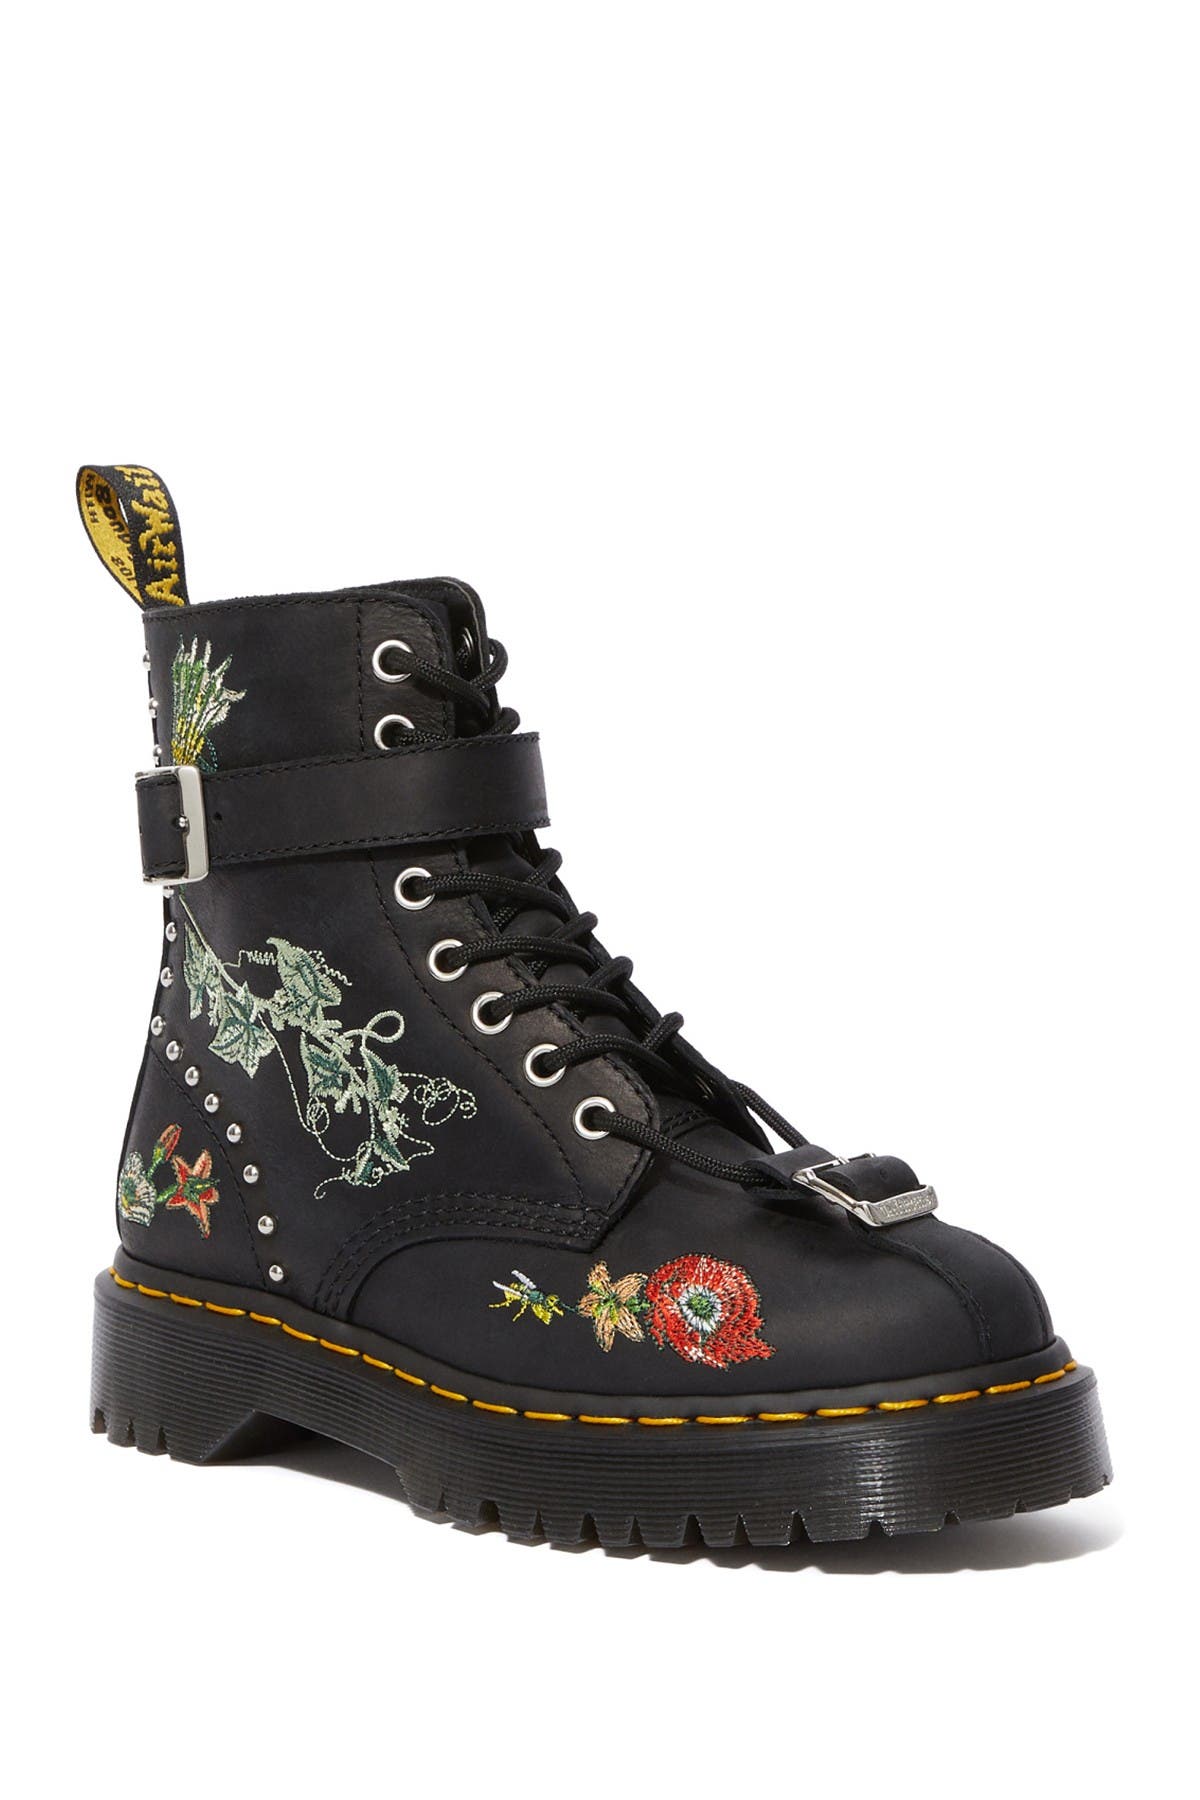 floral hiking boots